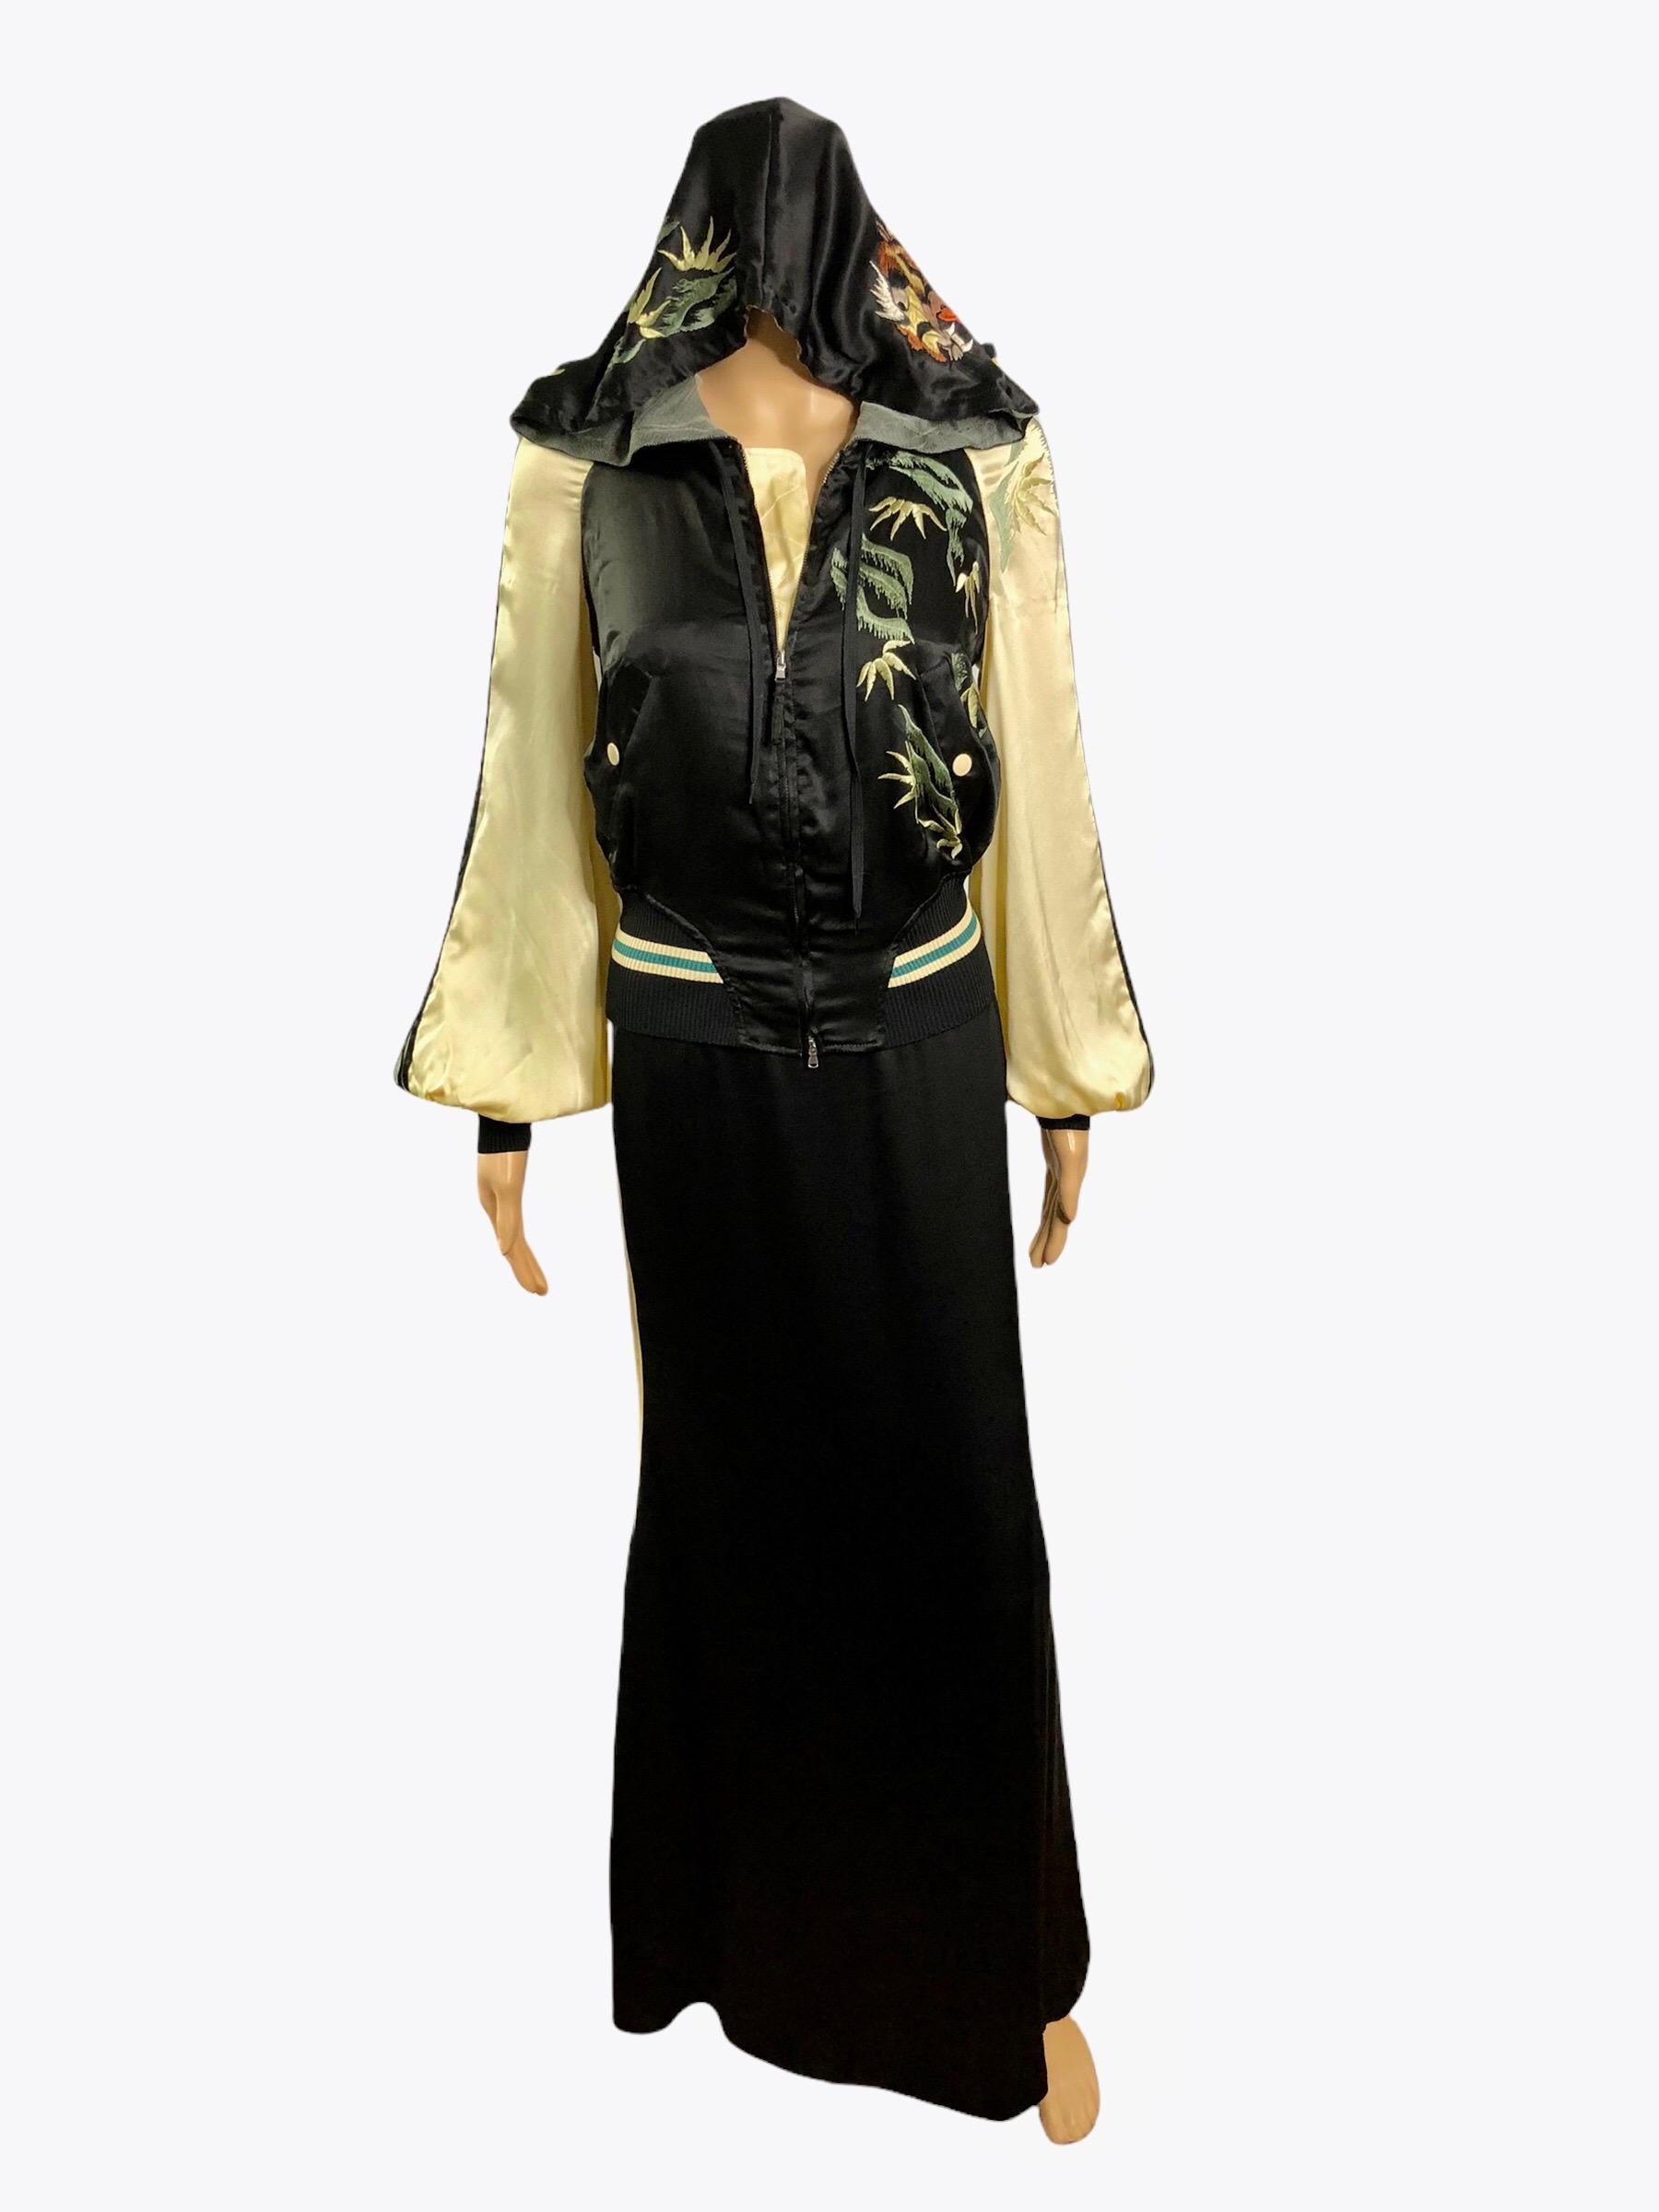 Jean Paul Gaultier S/S 2007 Runway Embroidered Silk Dress & Jacket 2 Piece Set  For Sale 3